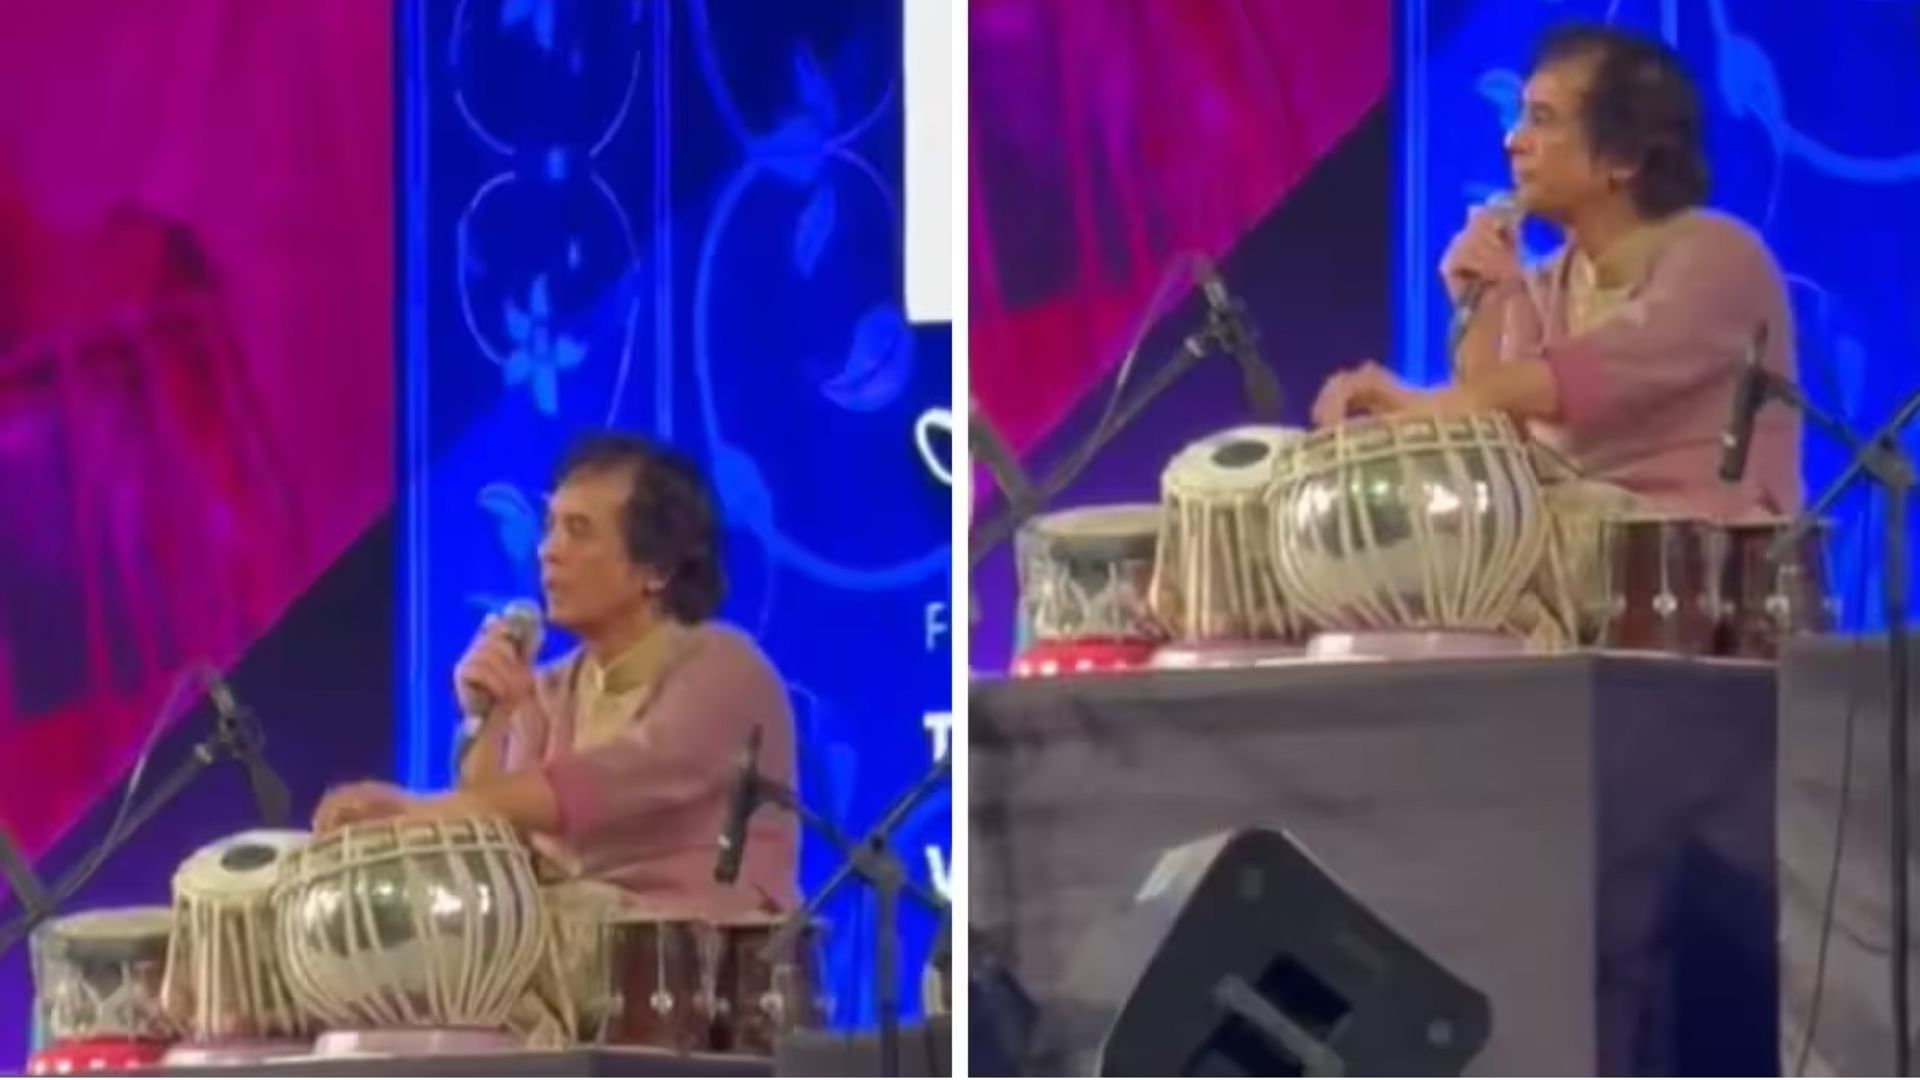 Zakir Hussain Plays Damru And Subsequently Produces The Sound Of Shankhnaad Of Ganas Both On Tabla